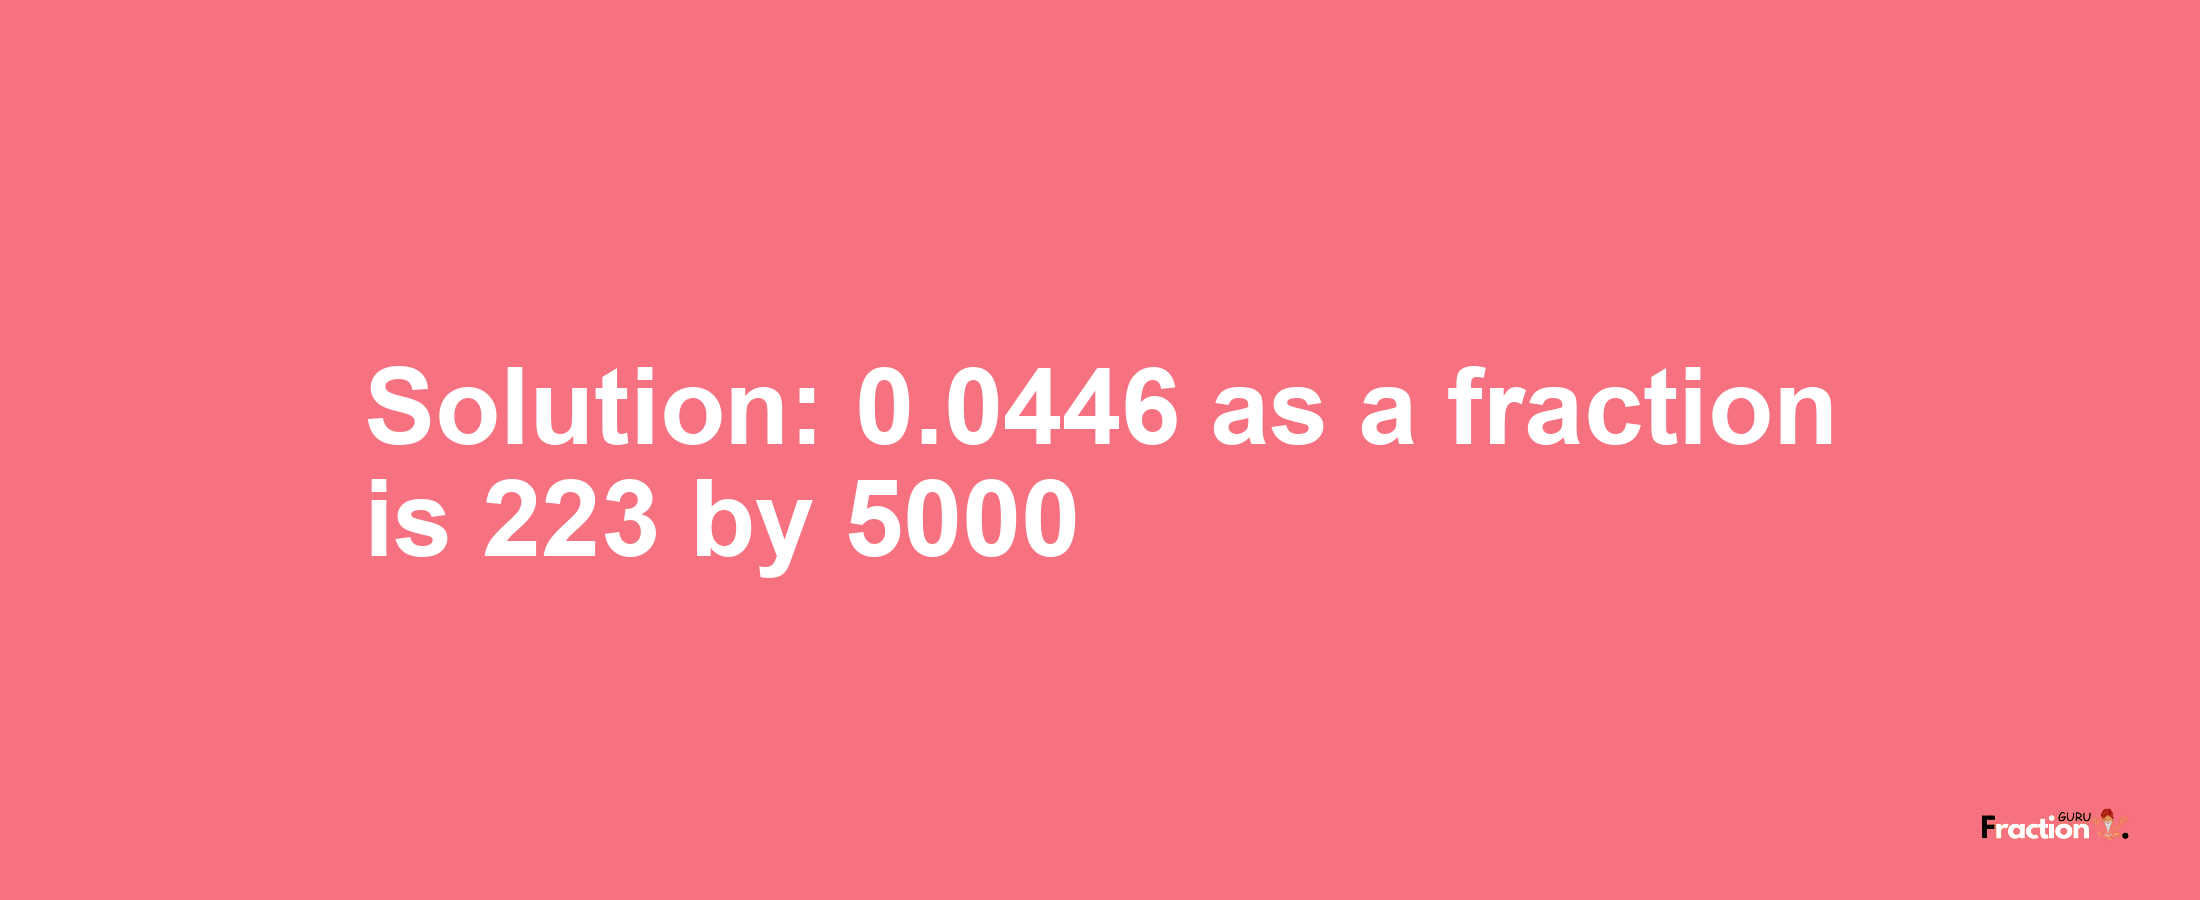 Solution:0.0446 as a fraction is 223/5000